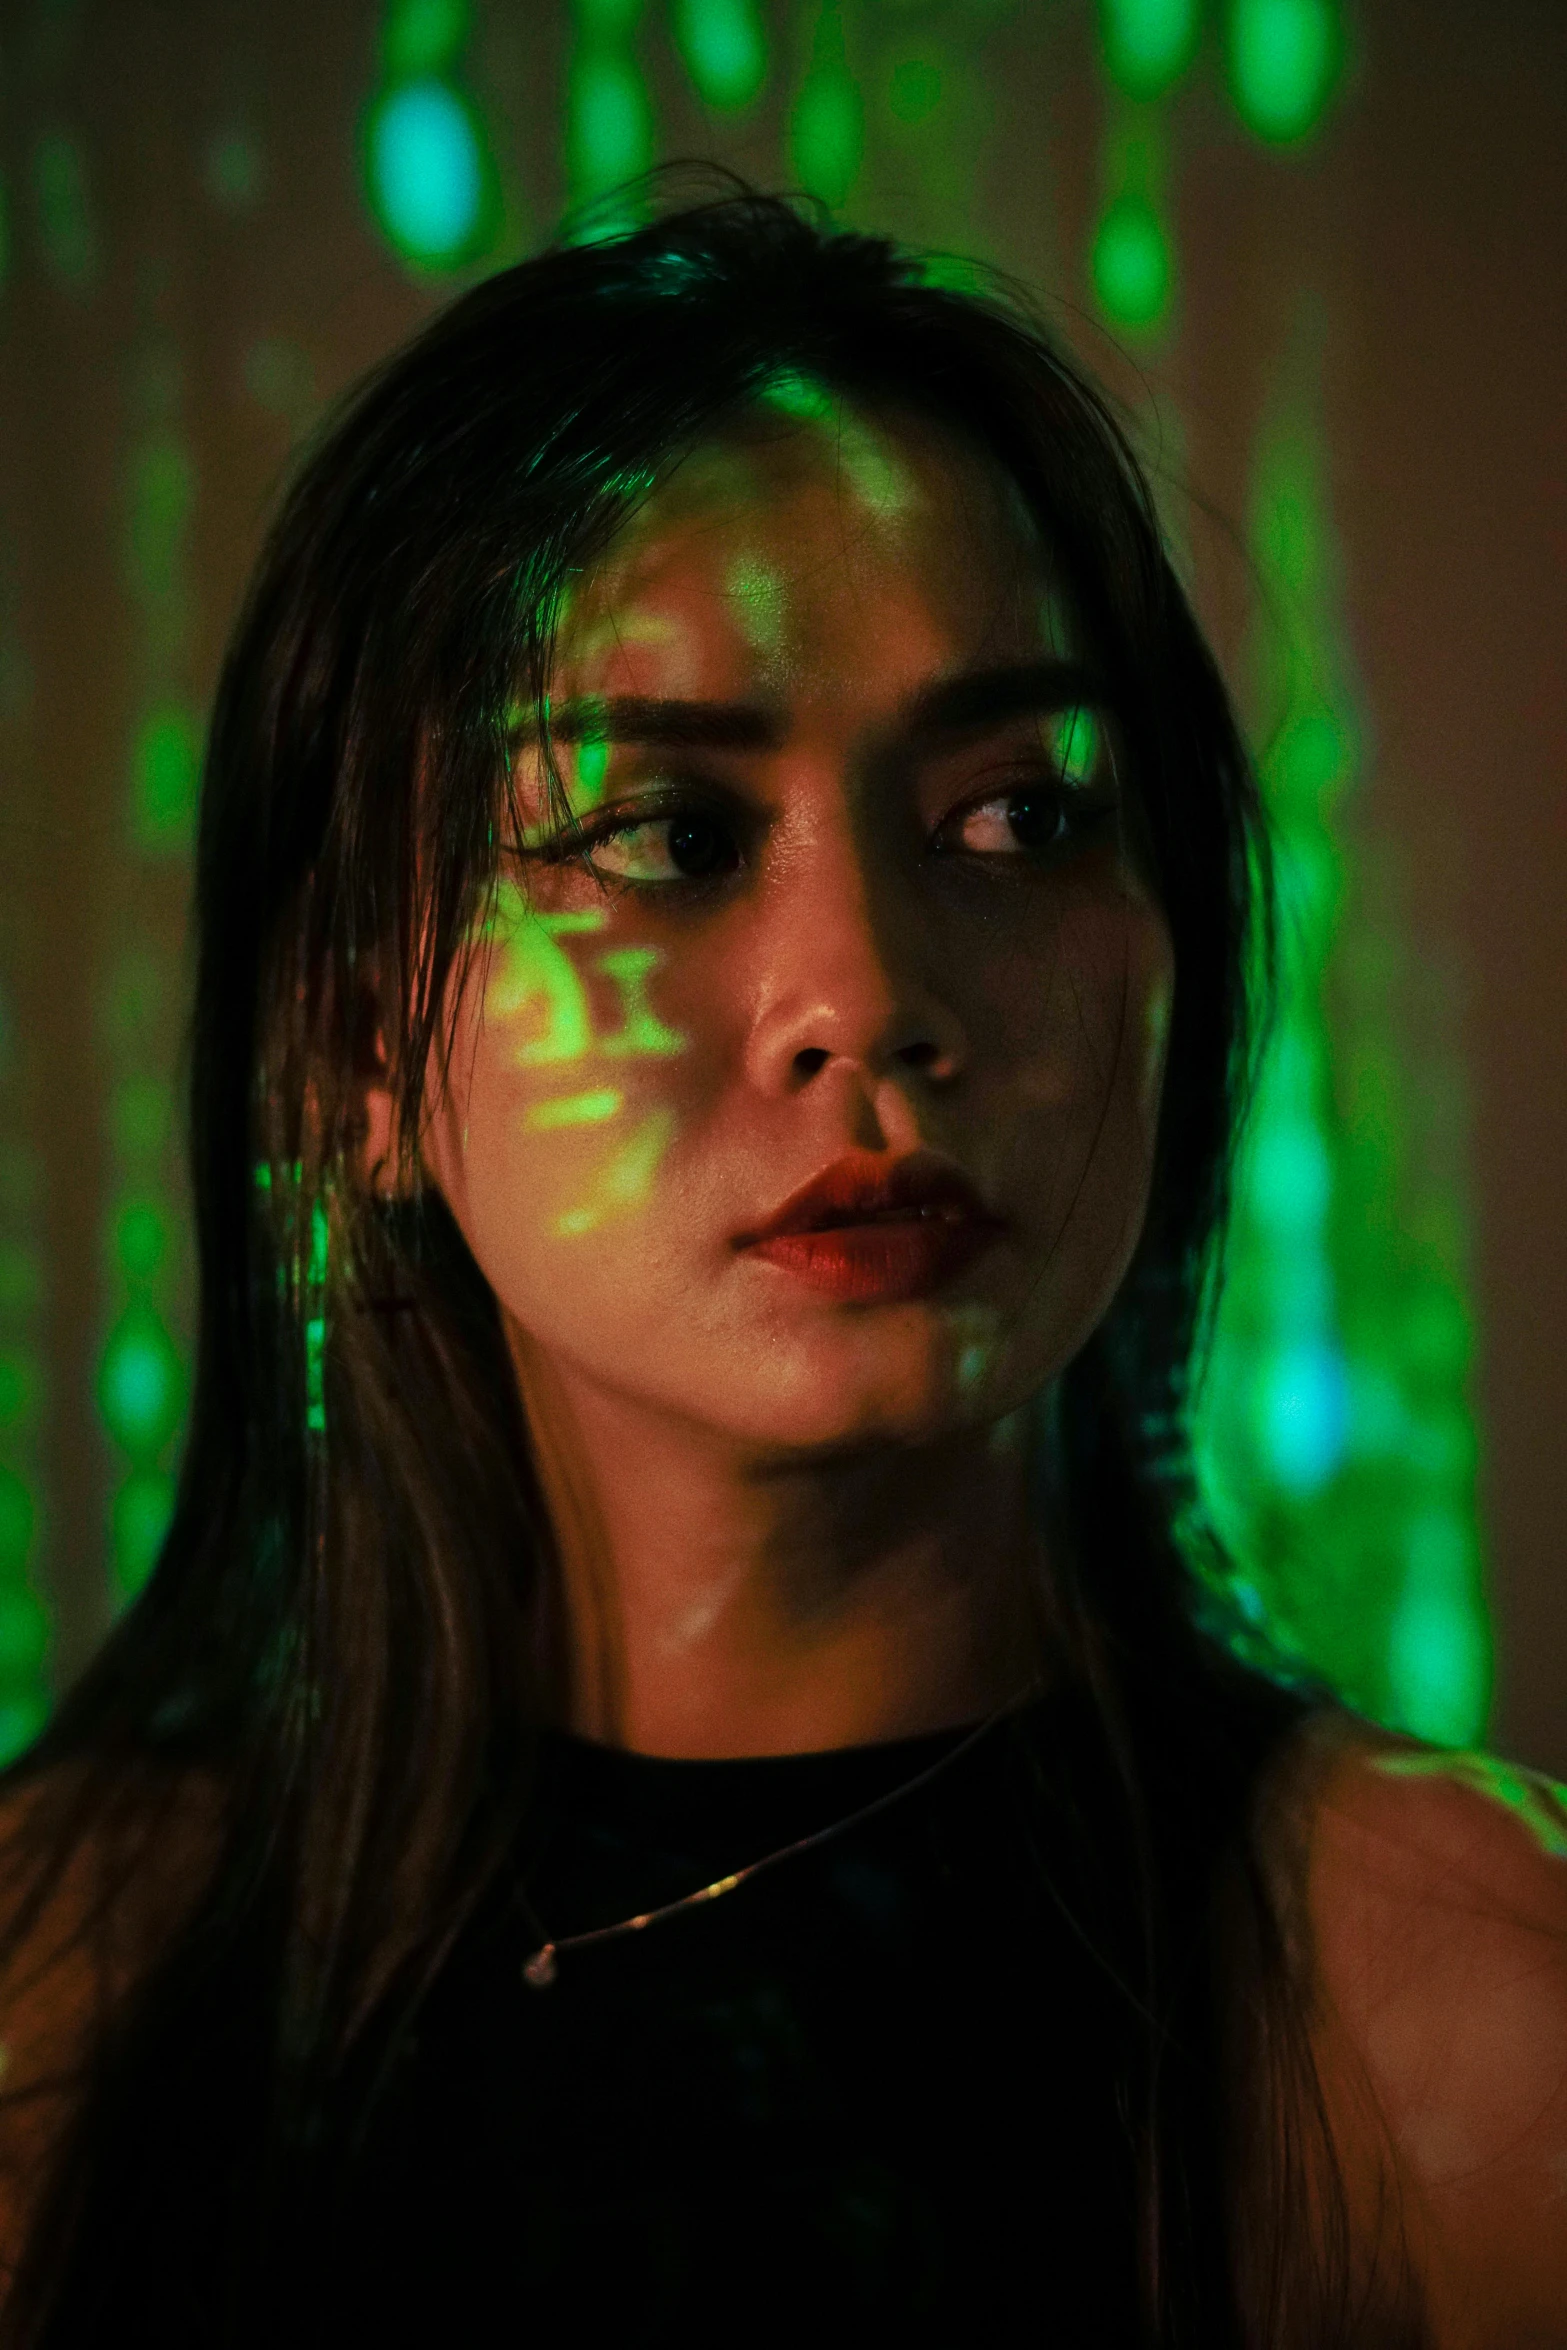 a woman is illuminated with green lights behind her